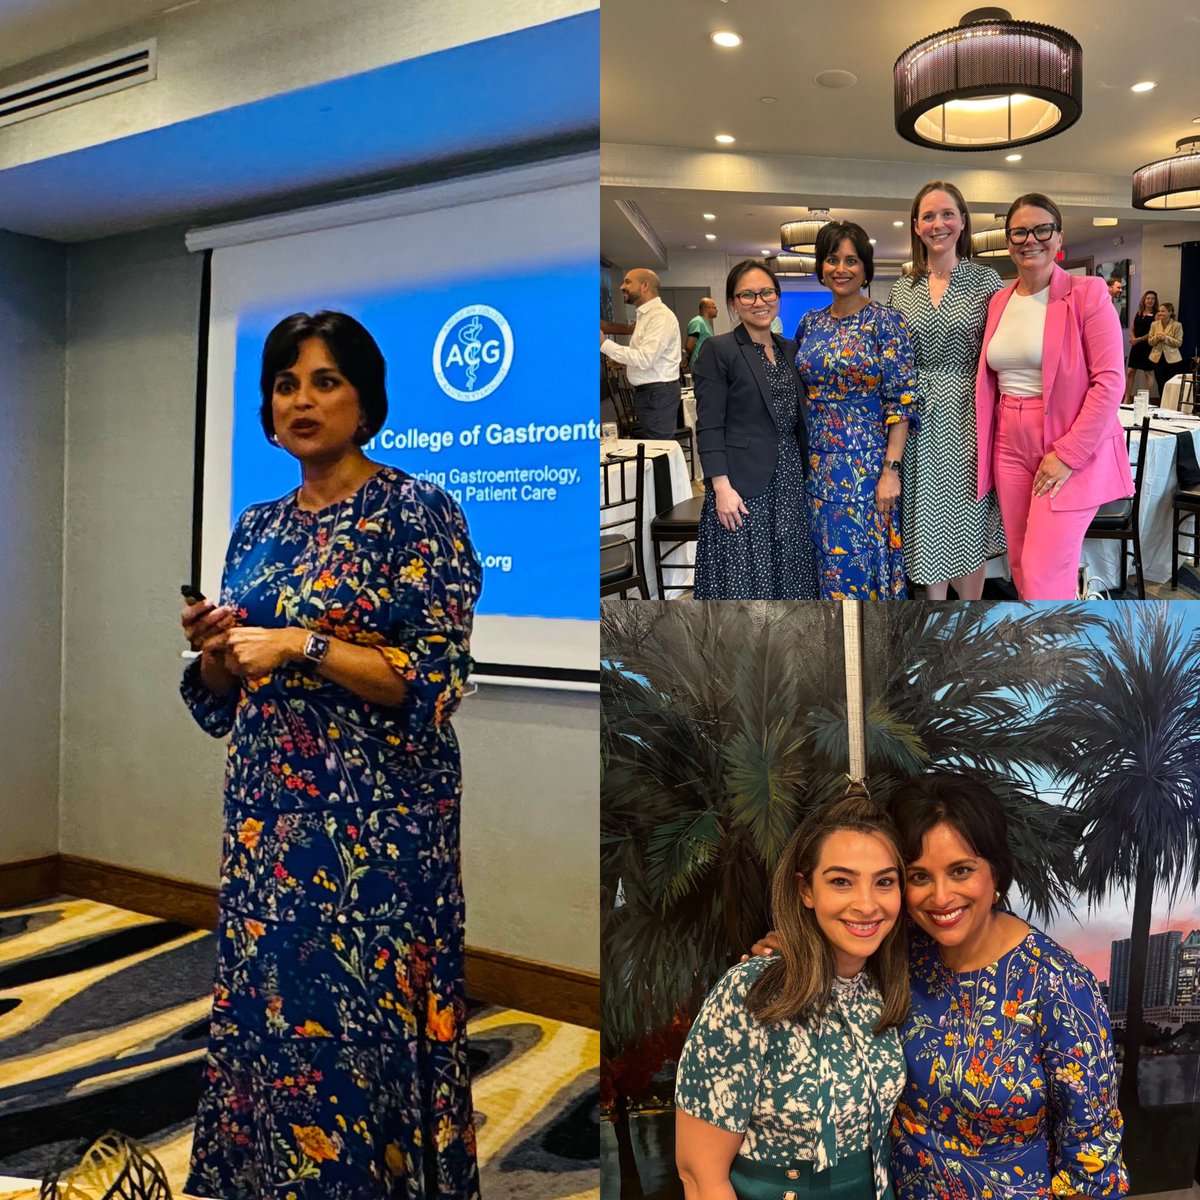 👉🏽 What a great evening with the Florida Women in GI and @AmCollegeGastro sponsored #OrlandoGutClub 👉🏽 Great cases, engaged audience and many #CardioGI myths slayed! 👉🏽 Thank you @MN_GIMD & @ibdgijami for hosting #ACGInstitute #EAVP @MayoClinicGIHep